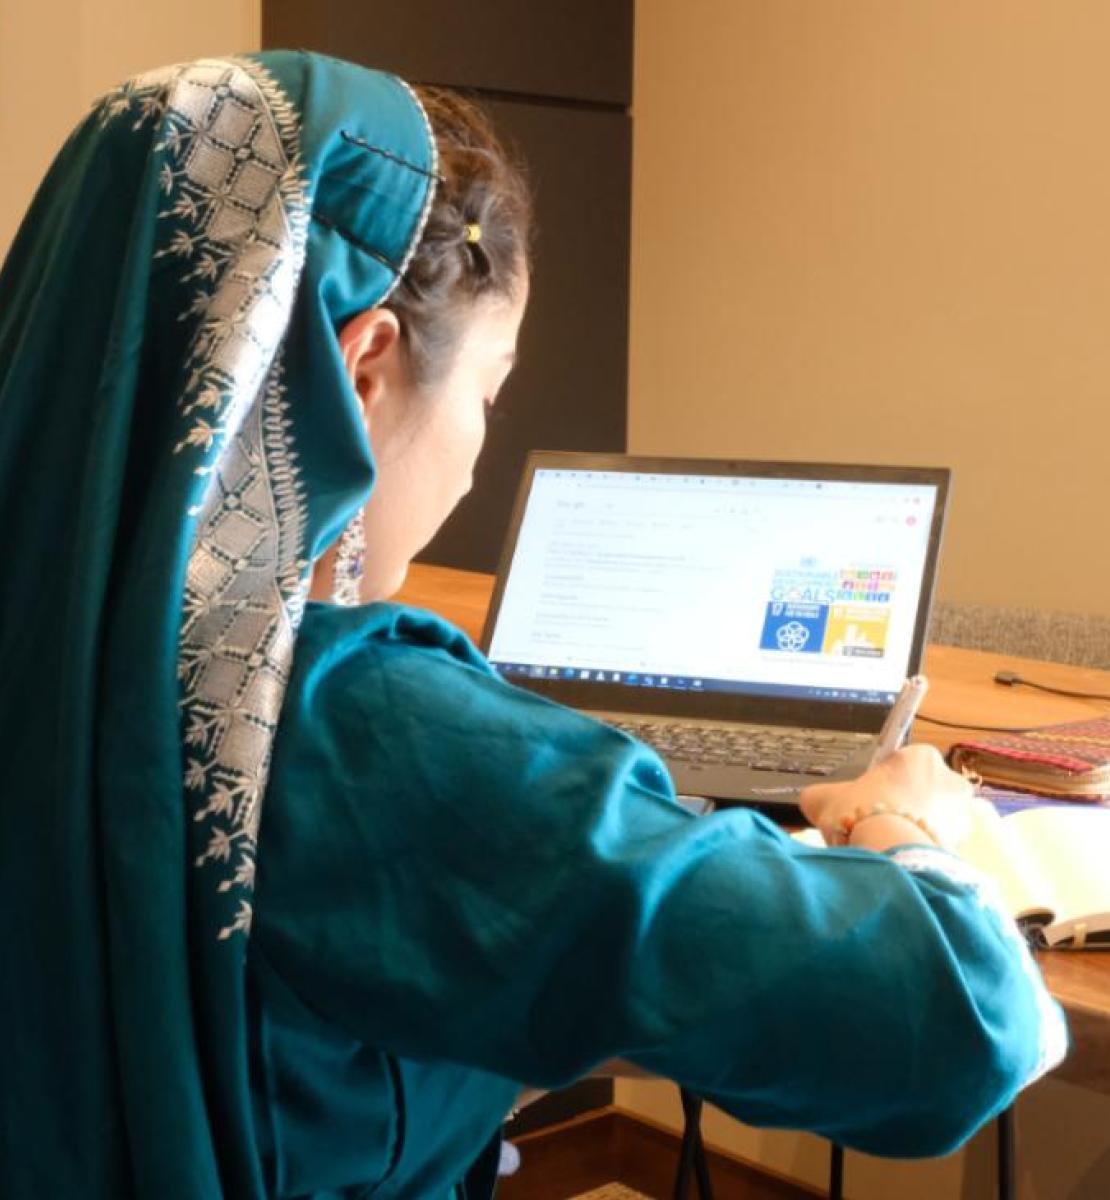 A female in a green satin-like dress with matching headscarf faces away from the camera and works on a laptop.